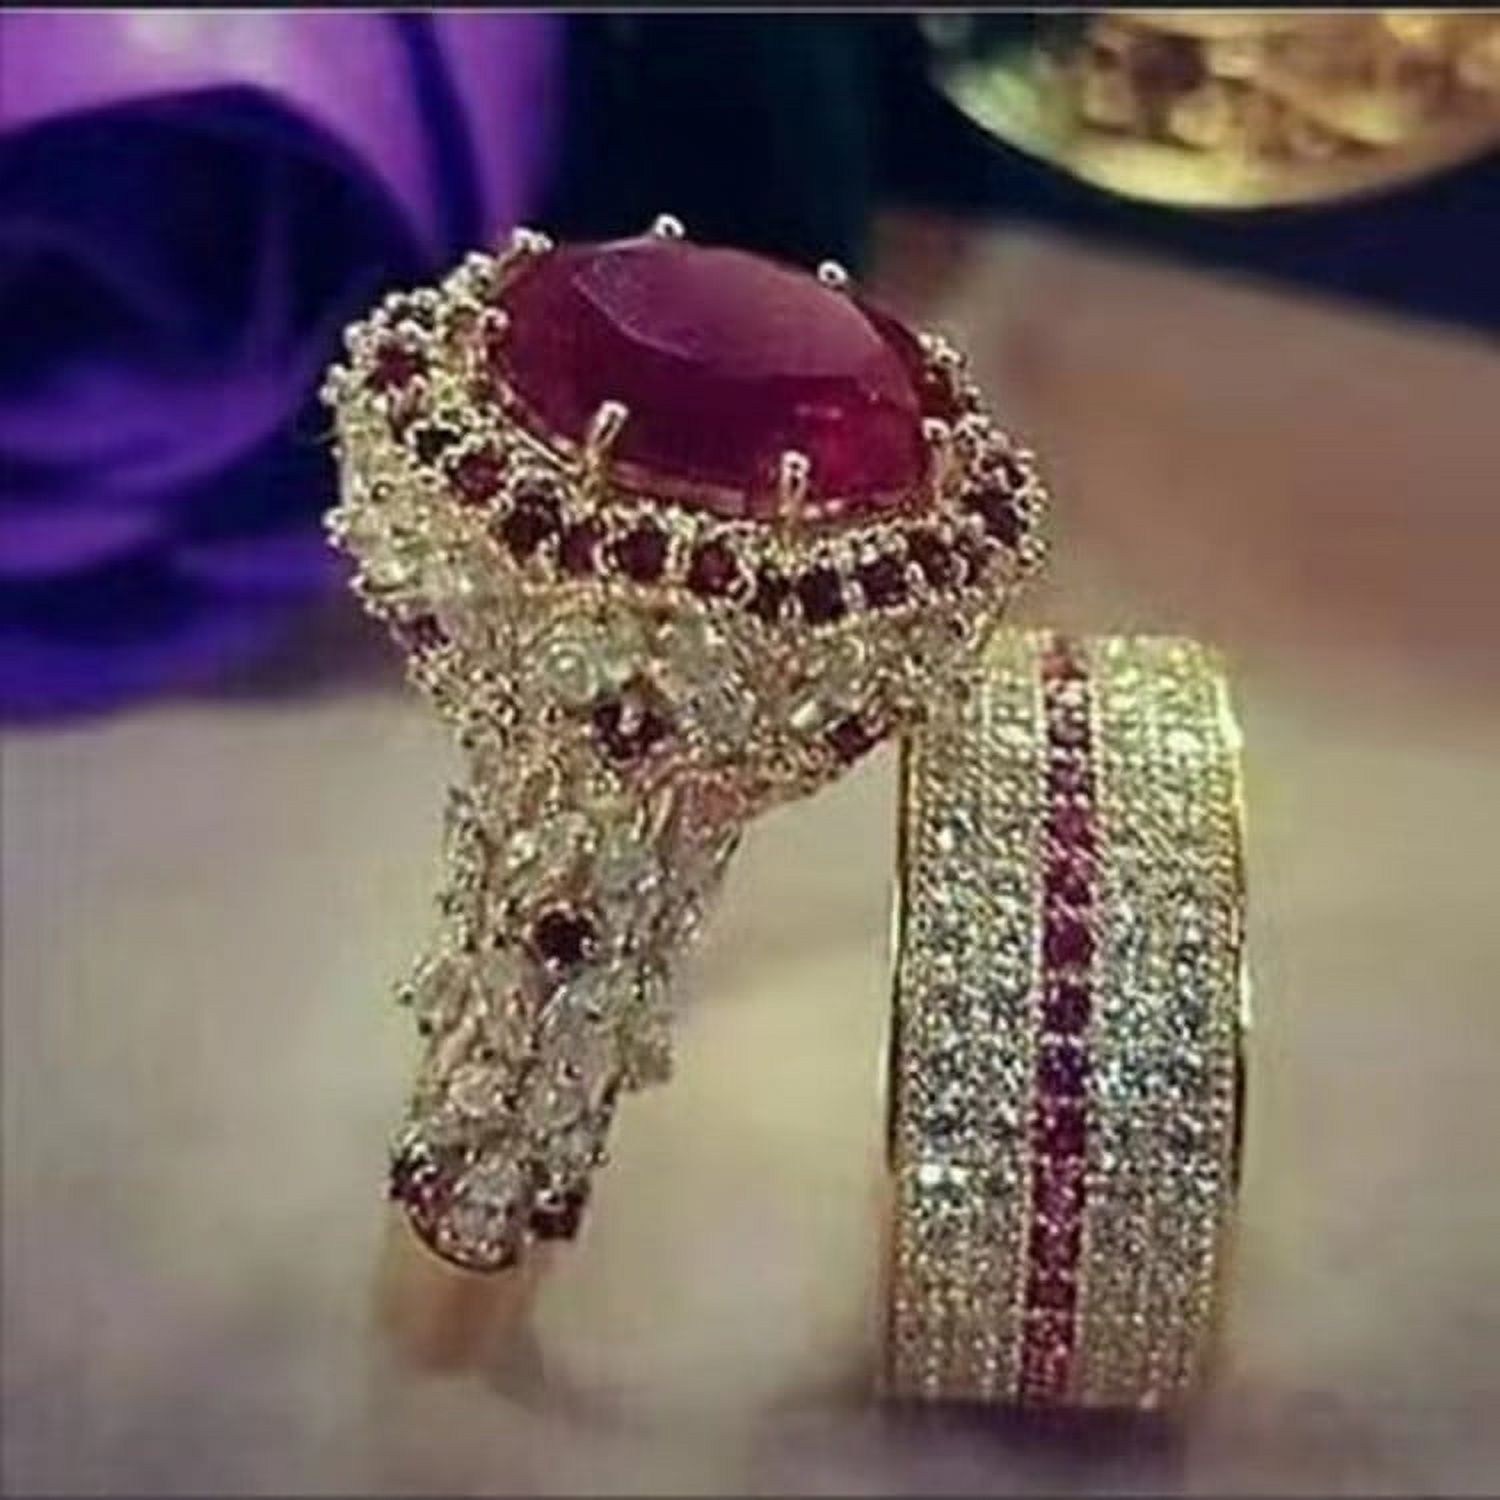 Woman Fashion Antique Art Jewelry Exquisite 18K Gold Natural Red Ruby Gem Diamond Ring - image 1 of 2